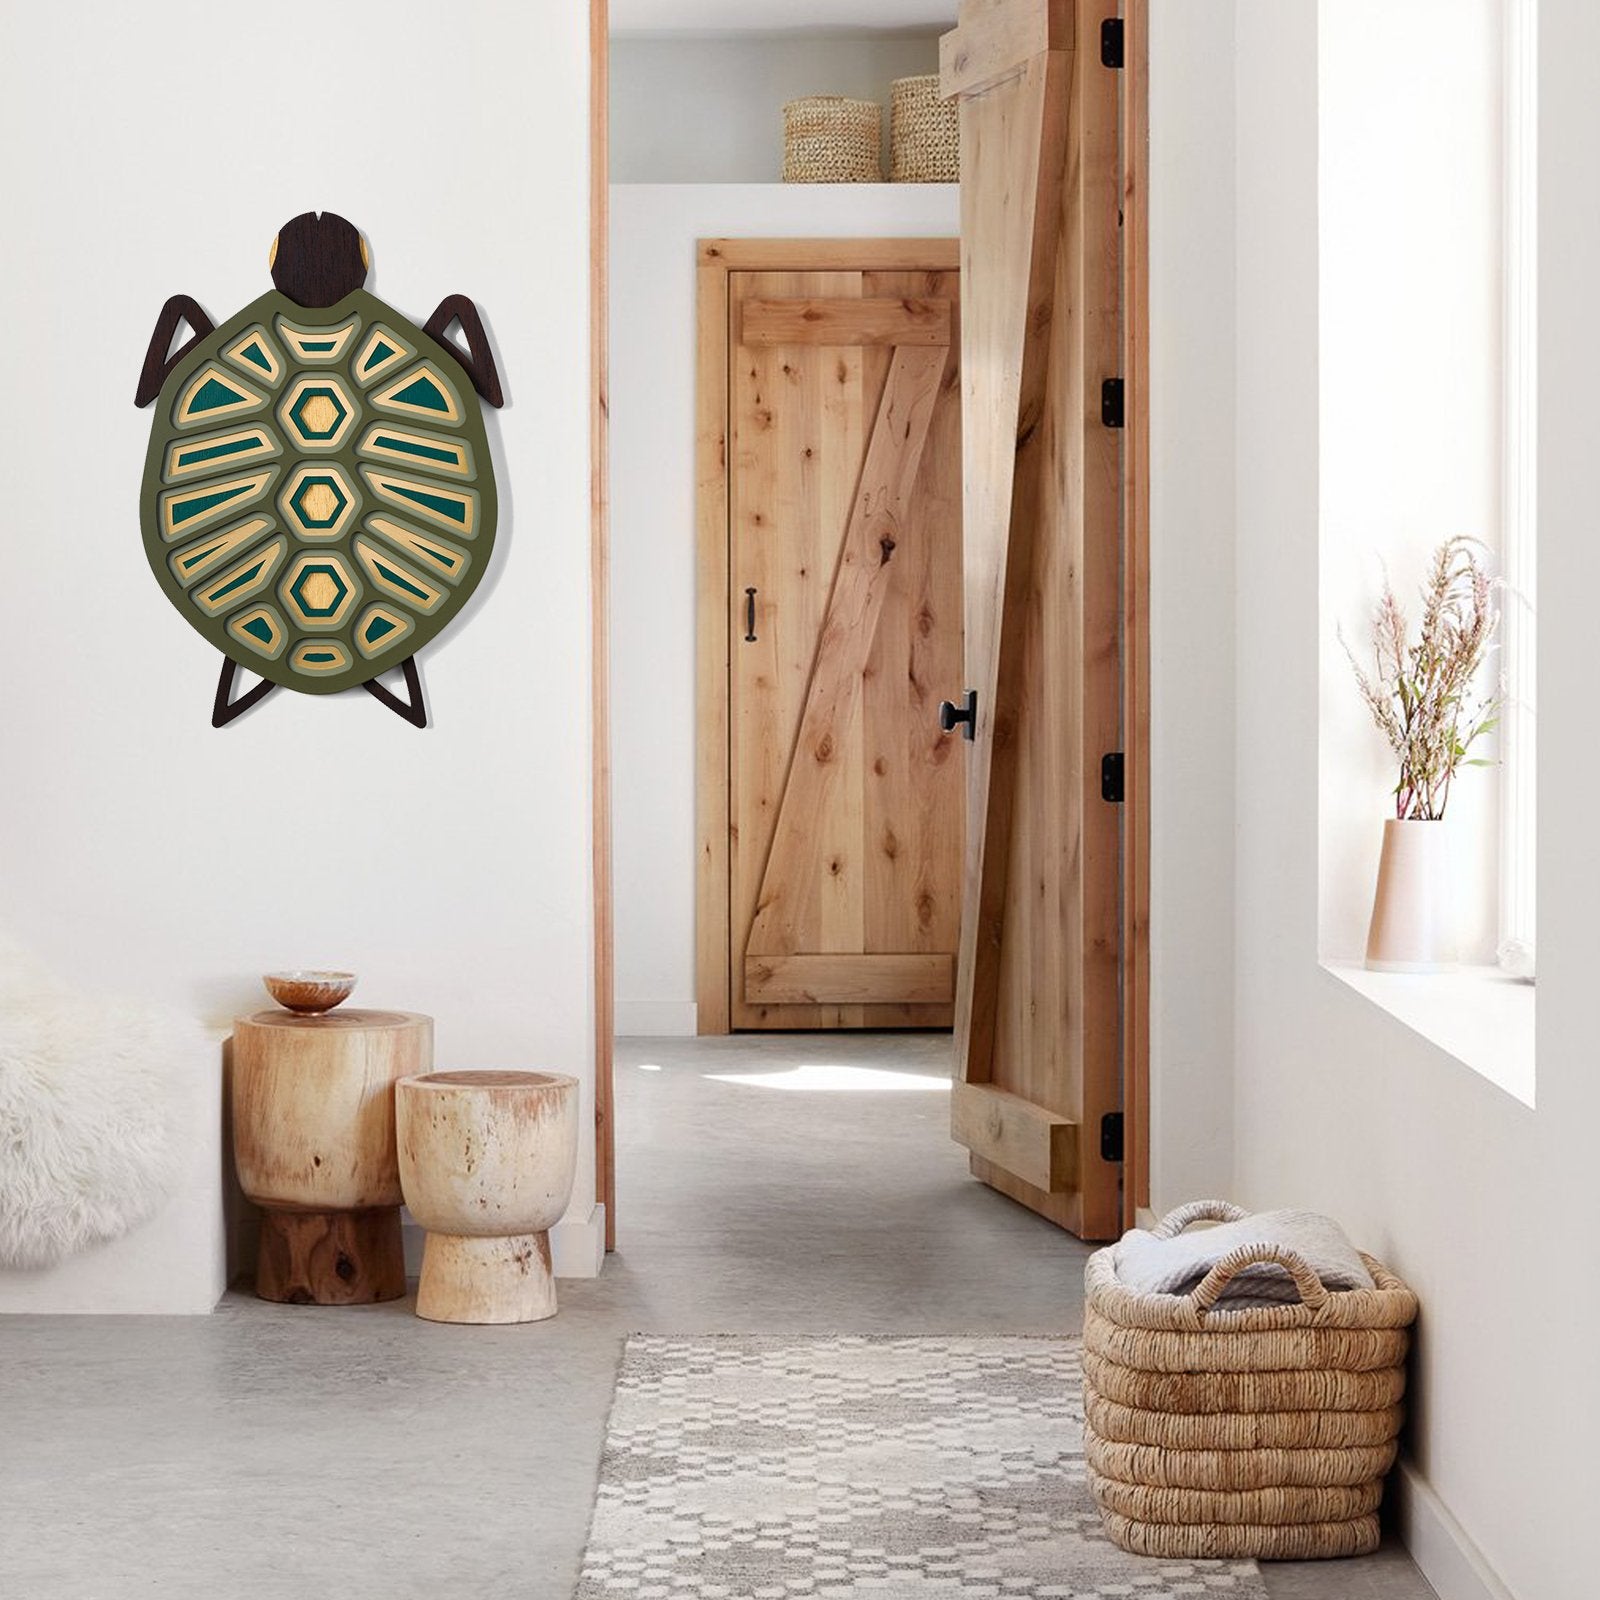 Wooden Turtle Wall Art to Home Decor by Umasqu